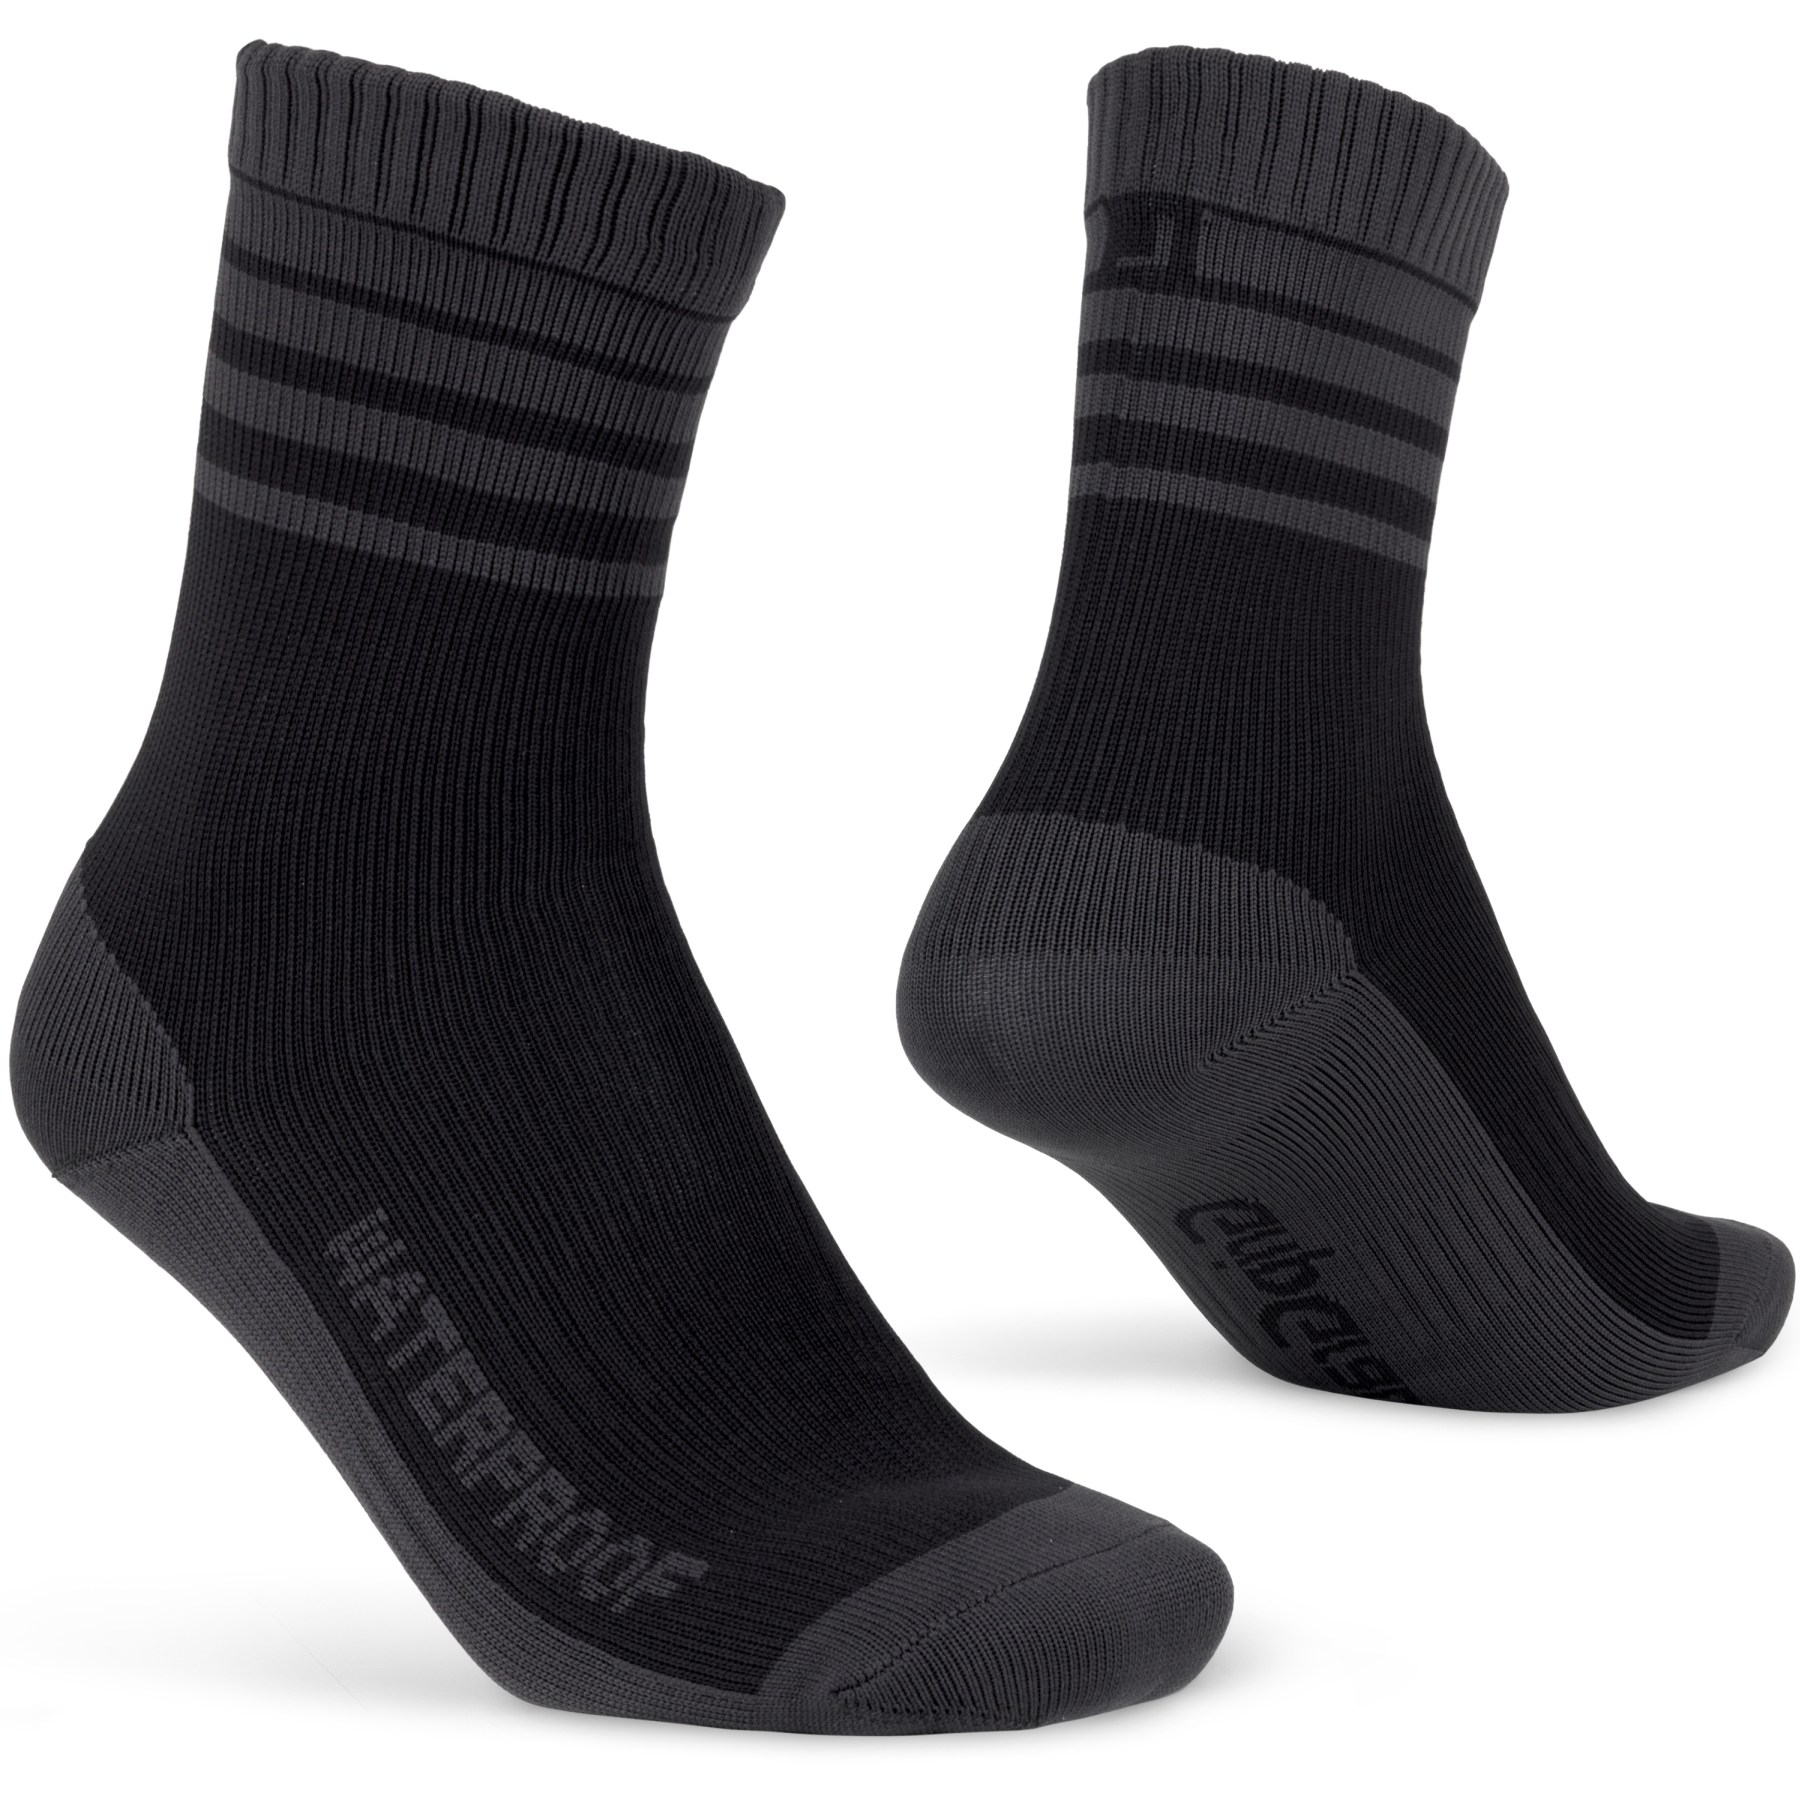 Foto de GripGrab Merino Thermal Calcetines impermeable - Black